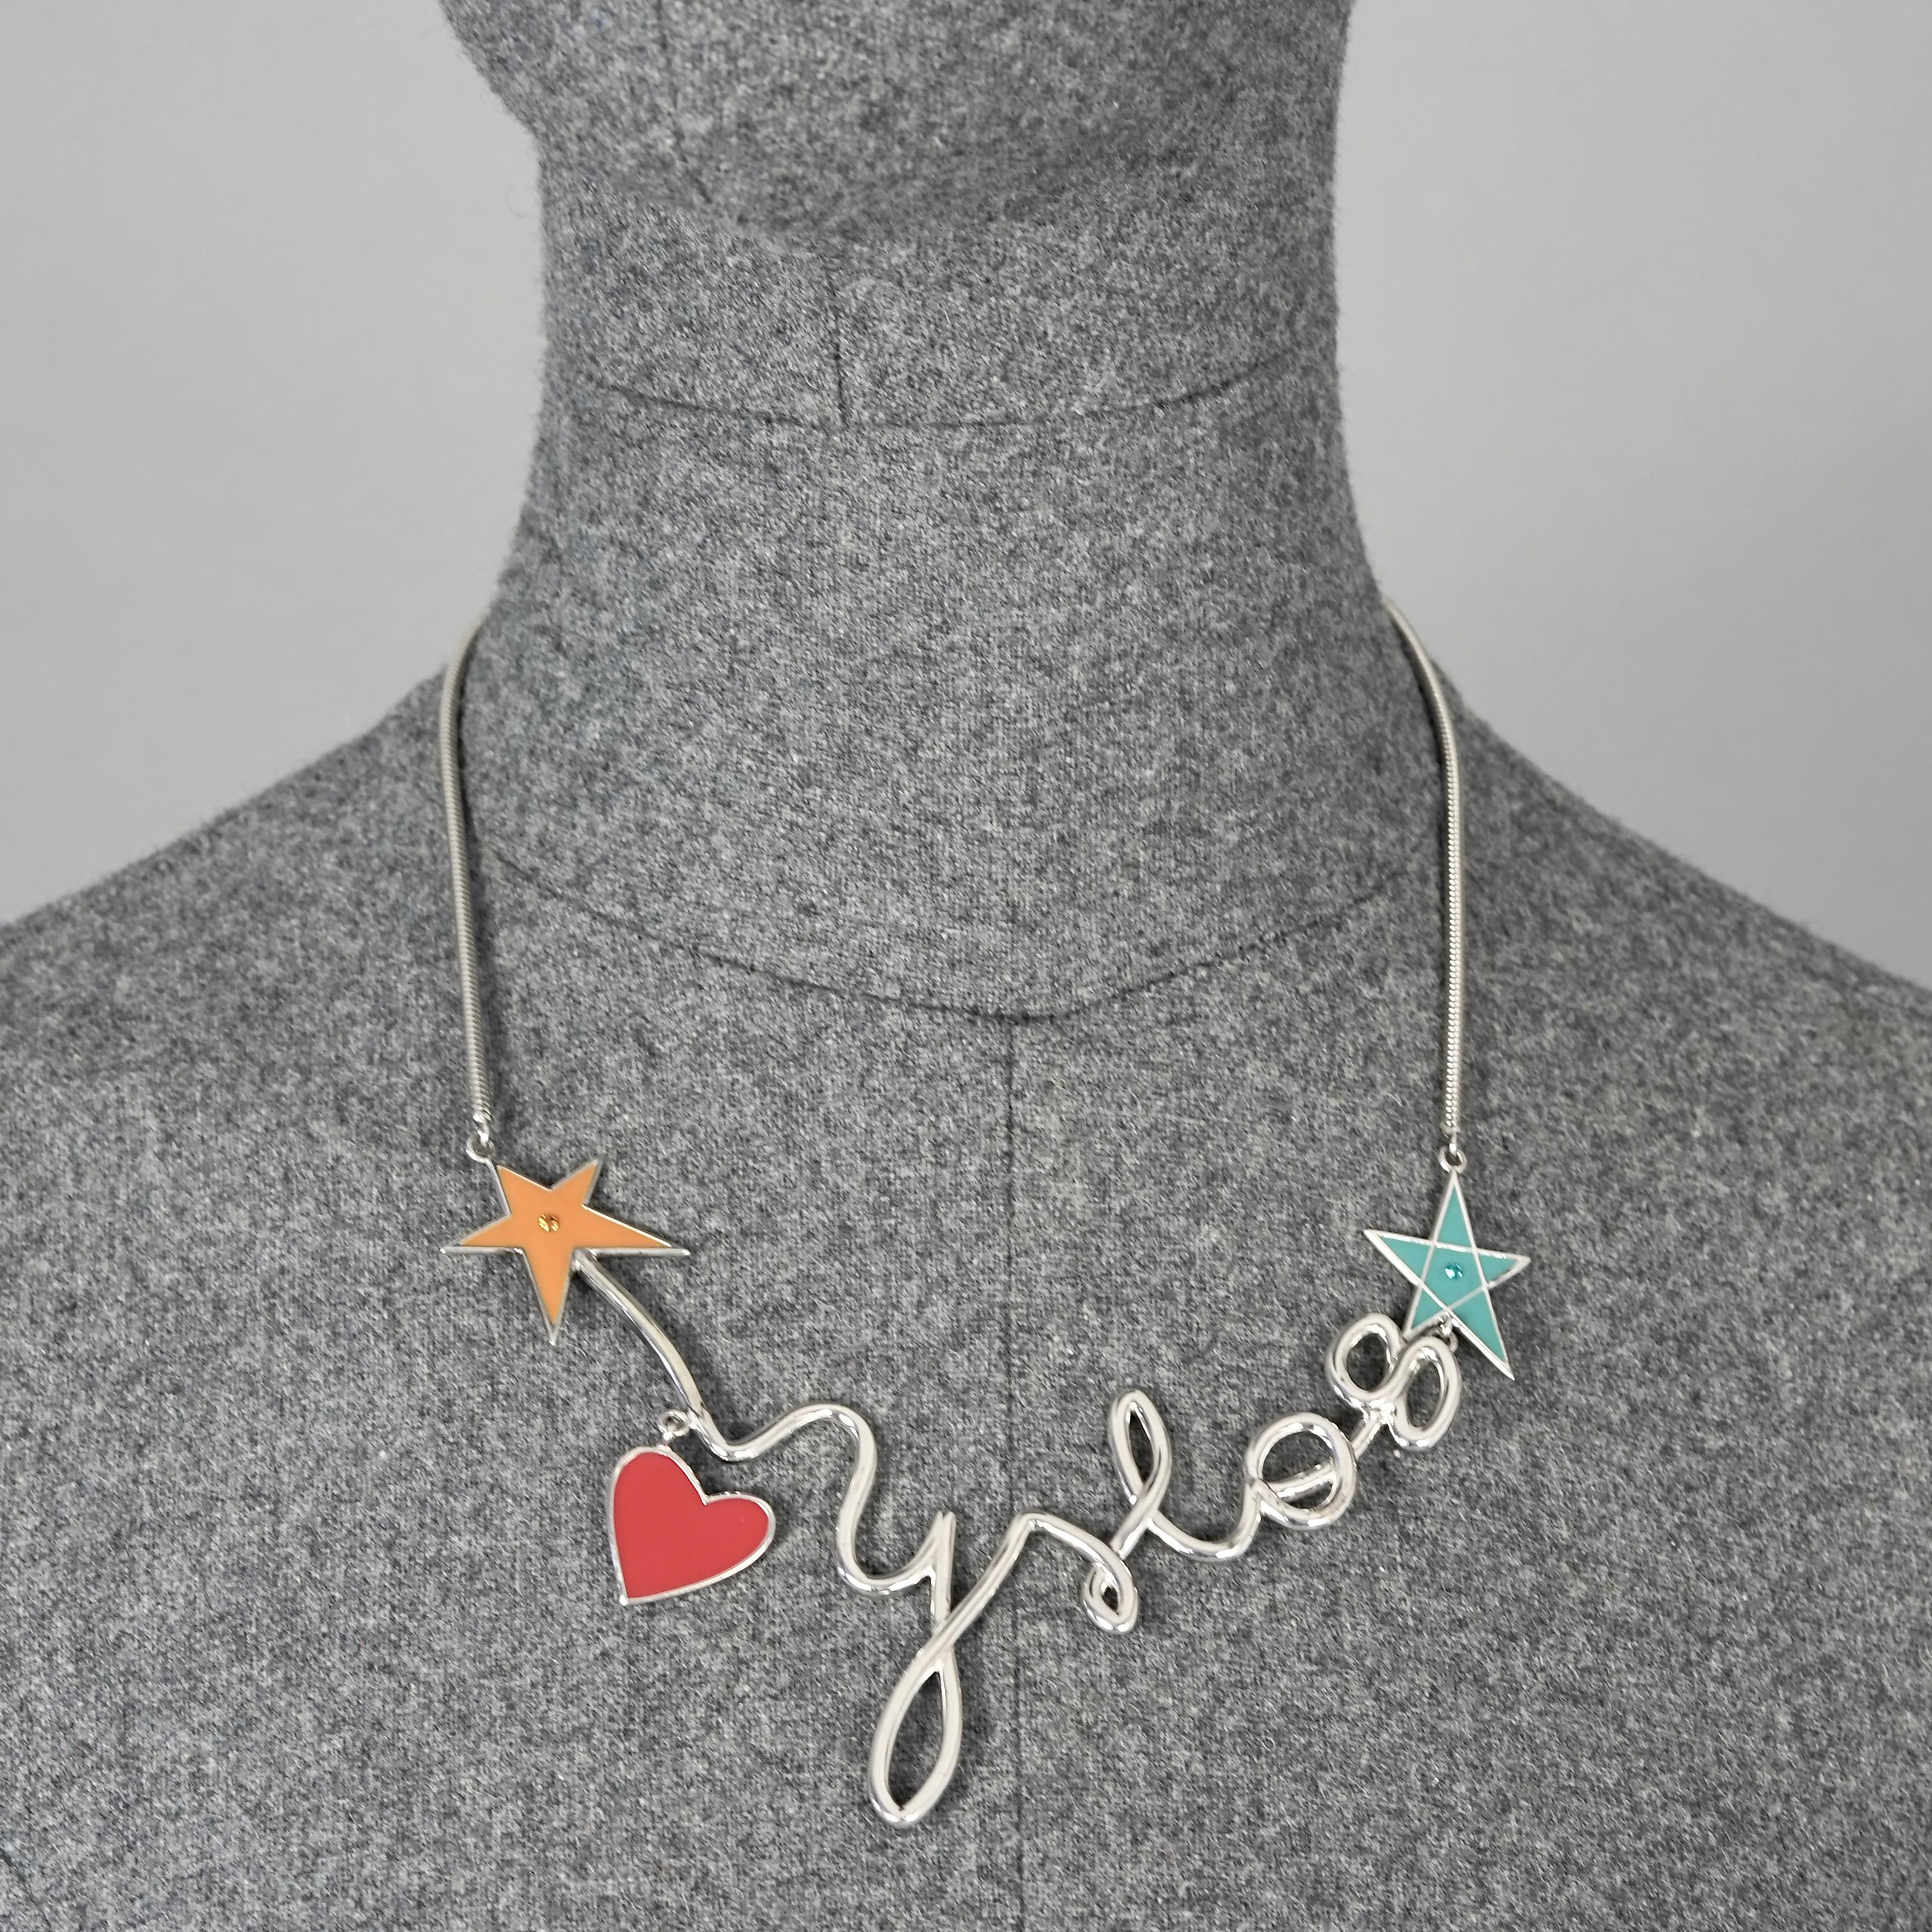 Vintage YVES SAINT LAURENT Ysl Logo Cursive Pop Heart Star Necklace

Measurements:
Height: 1.77 inches (4.5 cm) letter Y
Wearable Length: 14.96 inches (38 cm) to 18.11 inches (46 cm)

Features:
- 100% Authentic YVES SAINT LAURENT.
- YSL 08 in